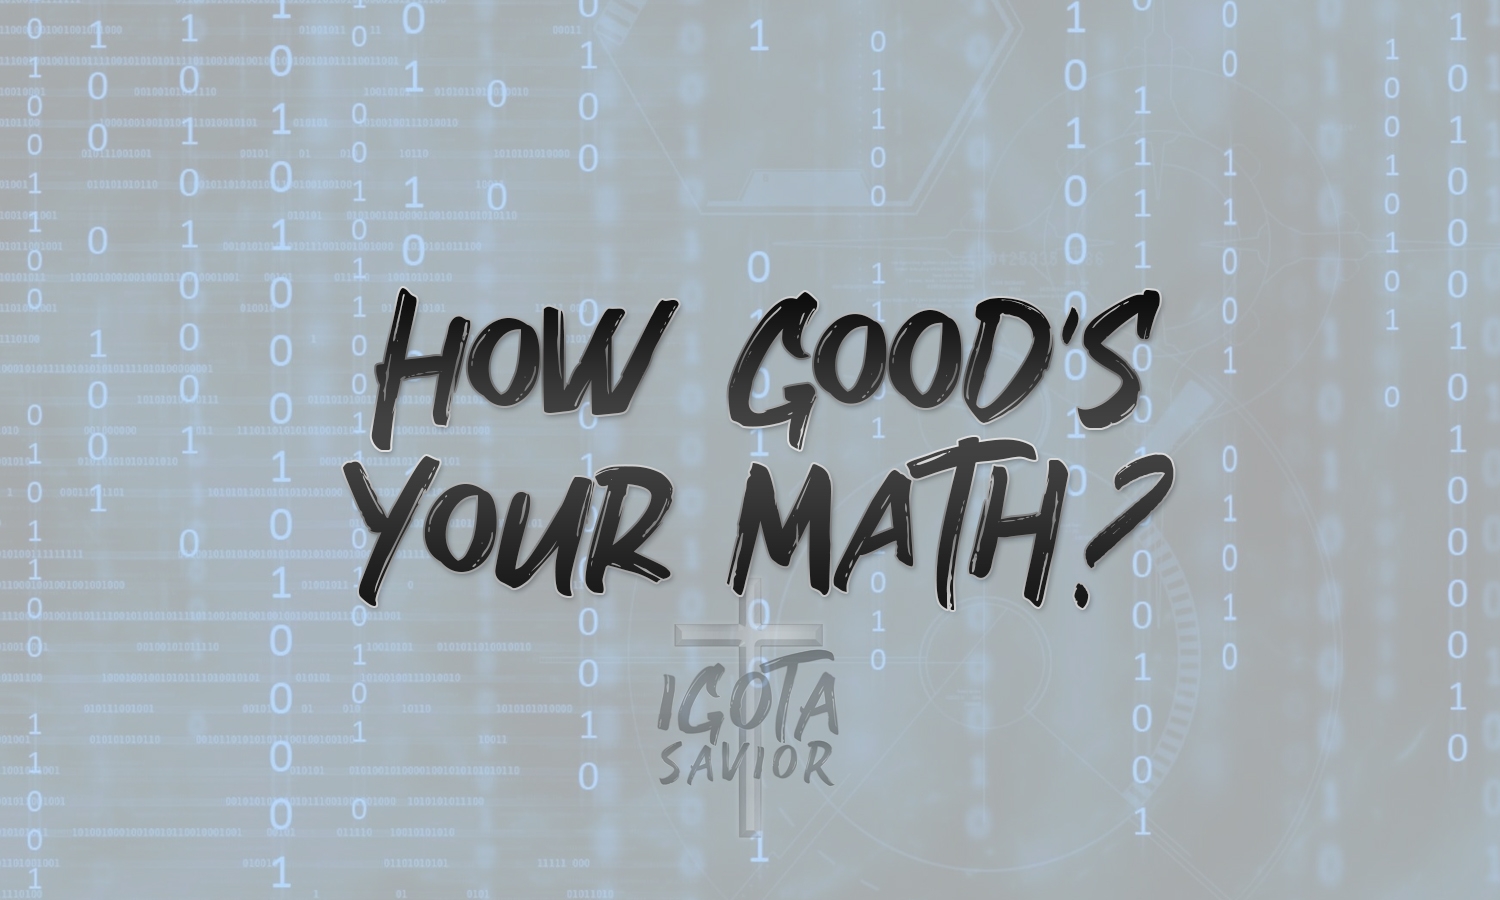 How Goods Your Math?